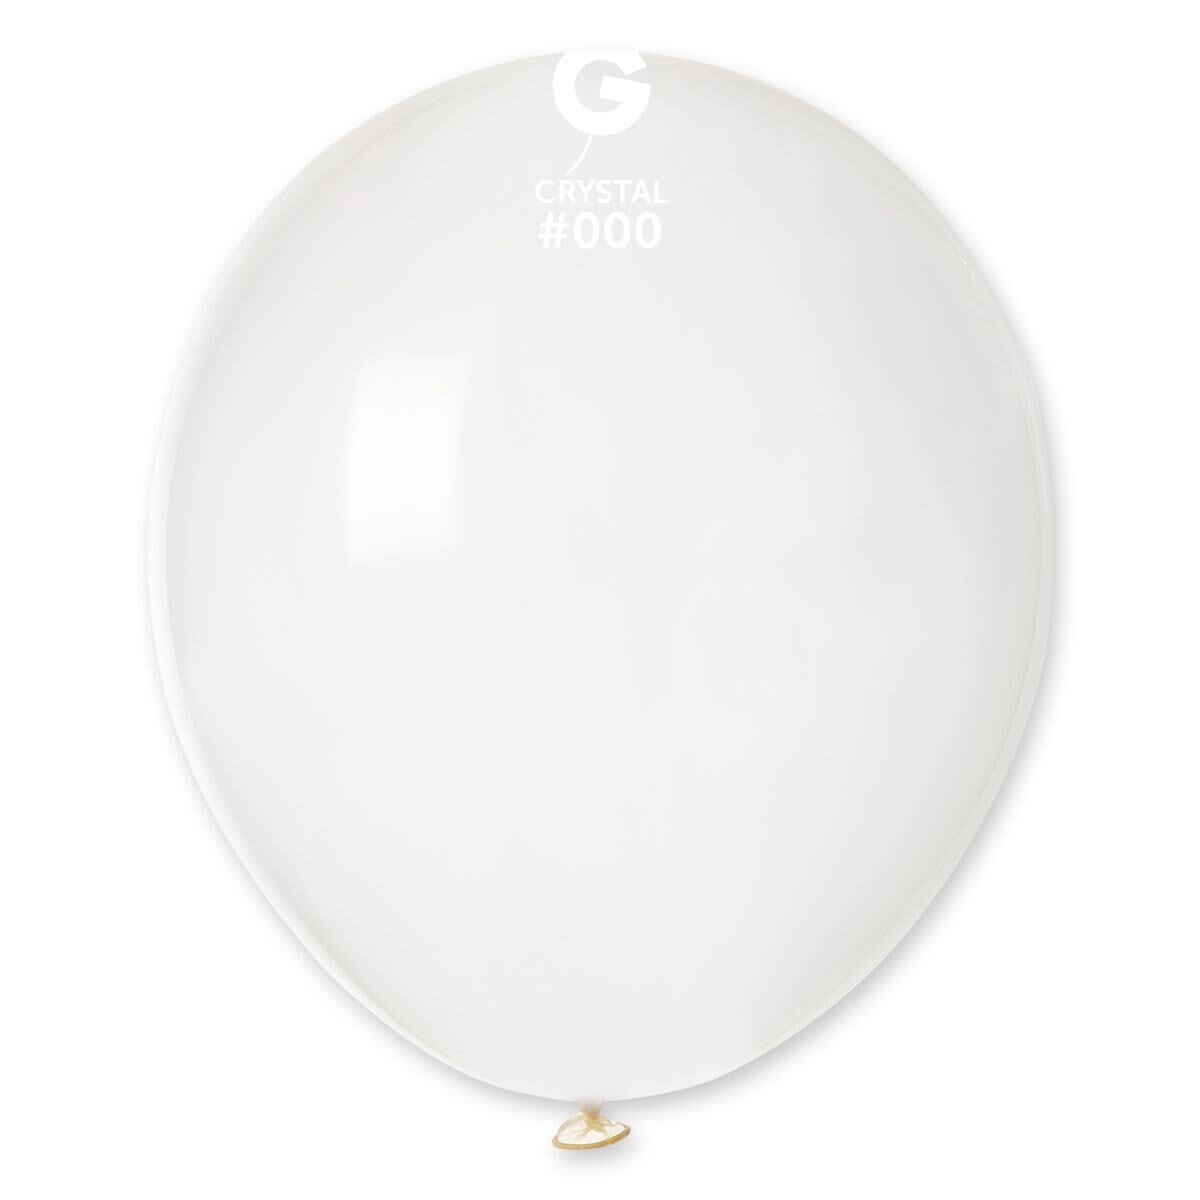 G18: #000 Stuffing Clear Balloons 180053